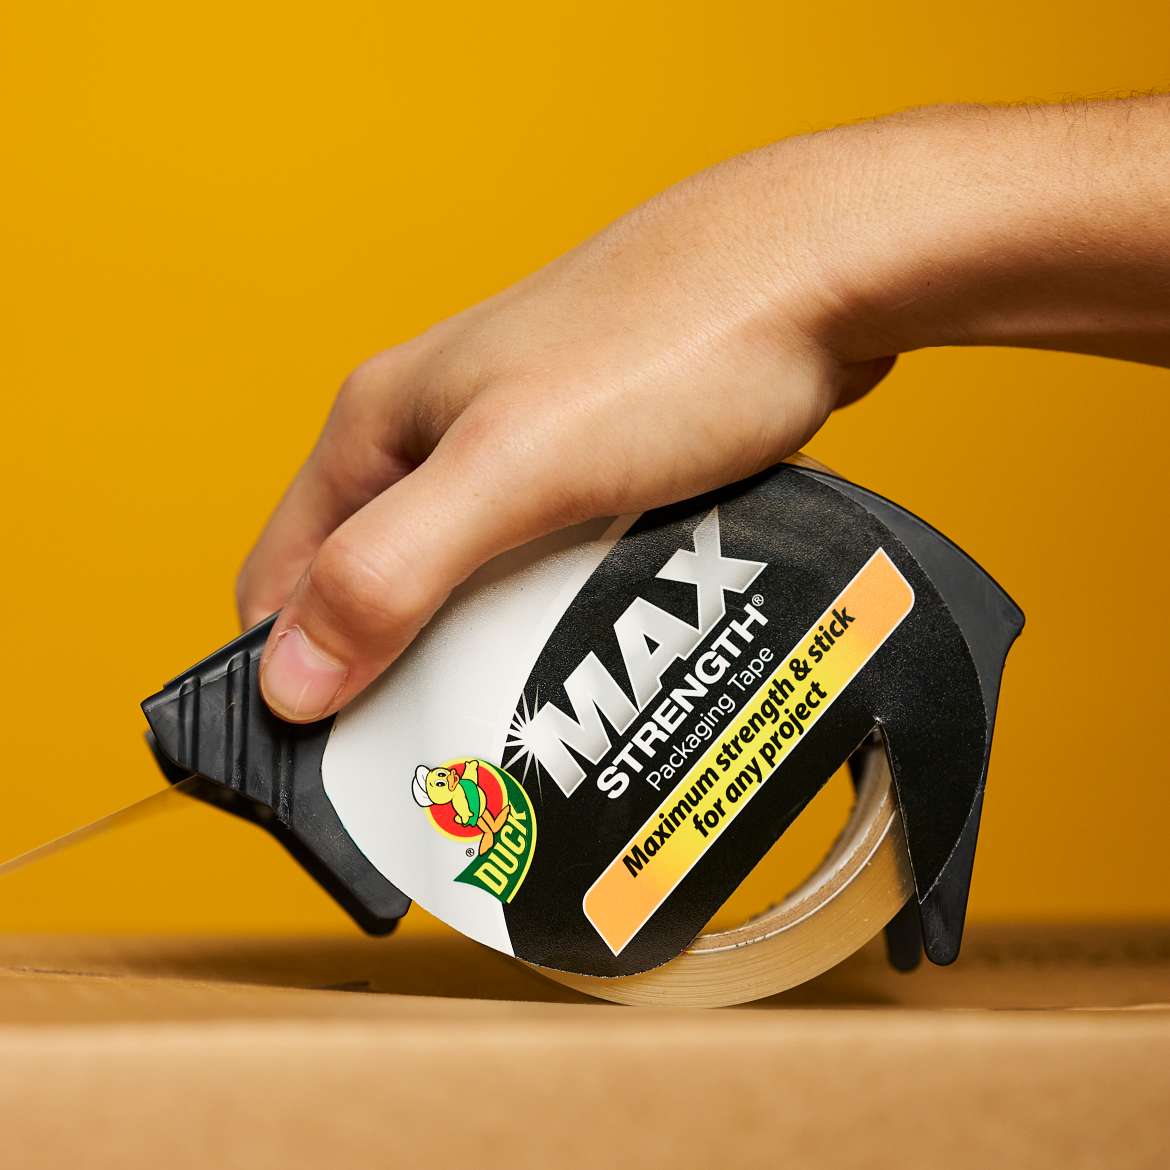 Duck Max Strength® Packing Tape